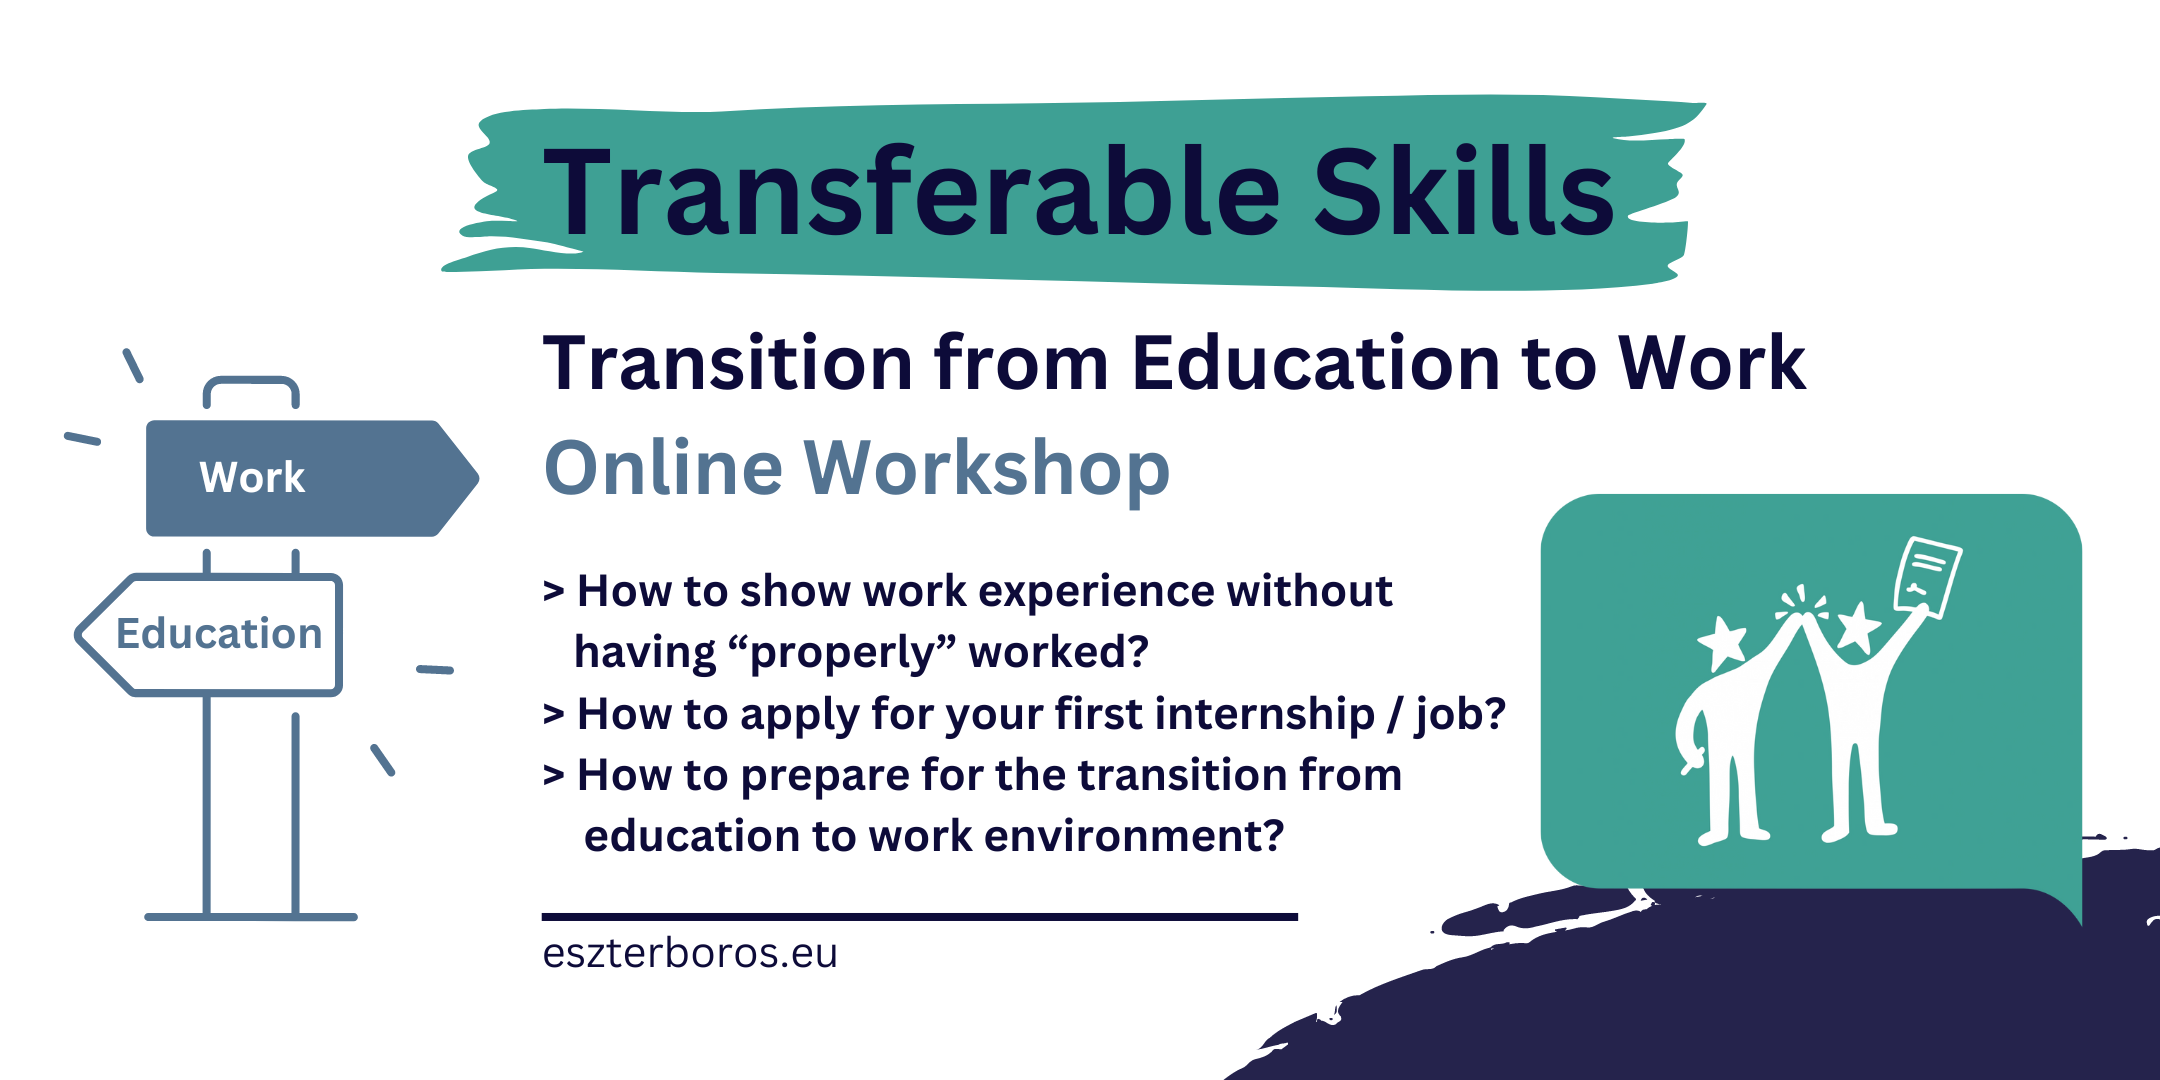 Transferable Skills – Transition from Education to Work | Youth Goal #7